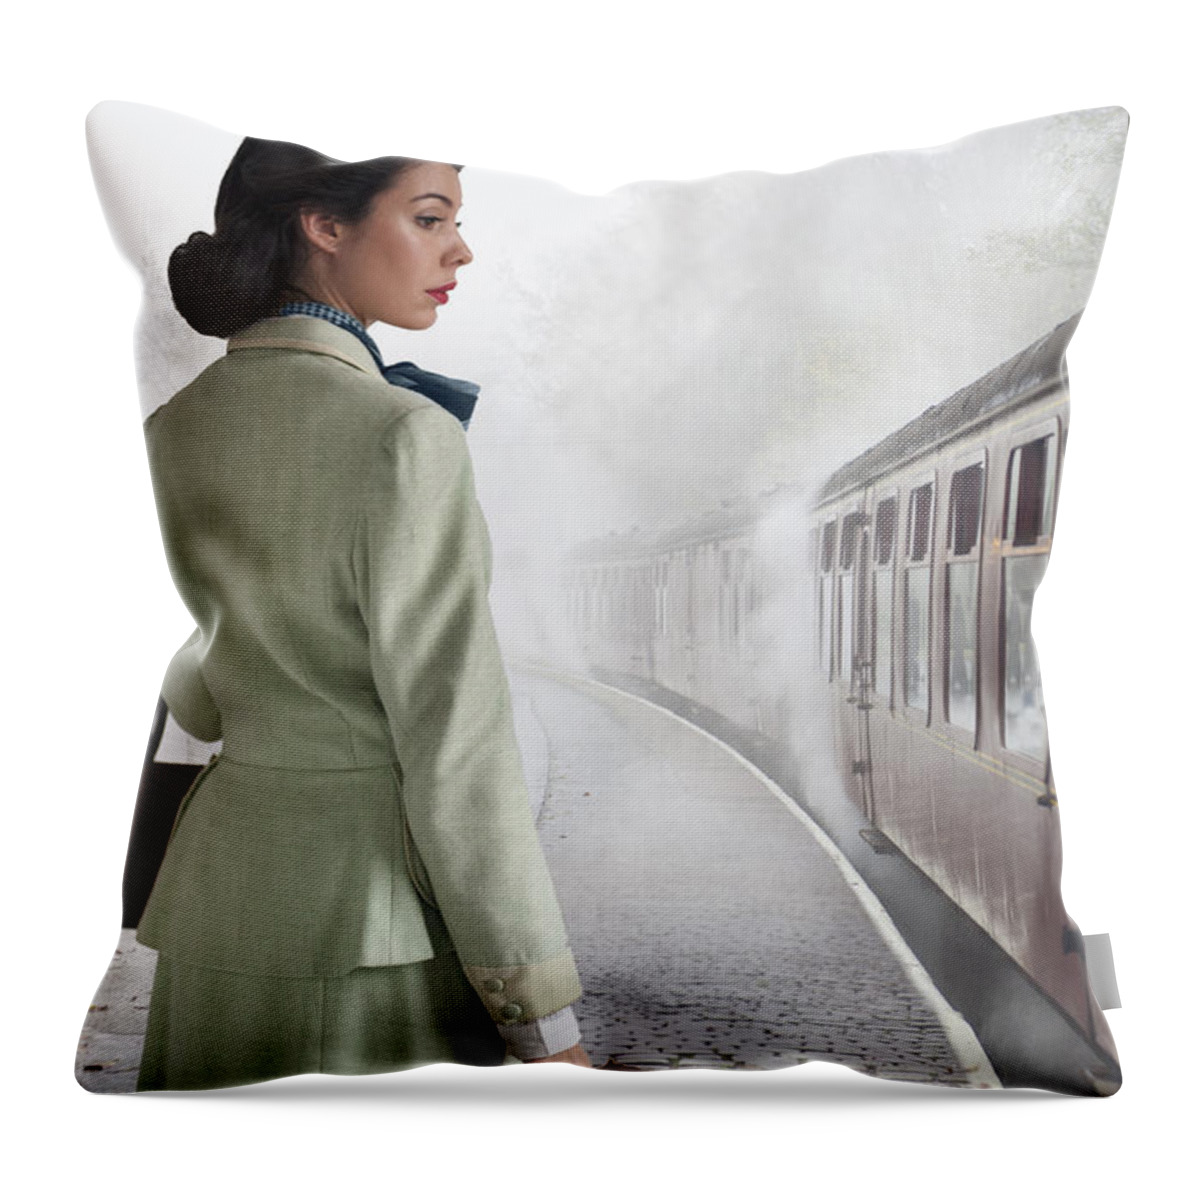 Woman Throw Pillow featuring the photograph 1940's Woman On A Railway Platform With Steam Train by Lee Avison